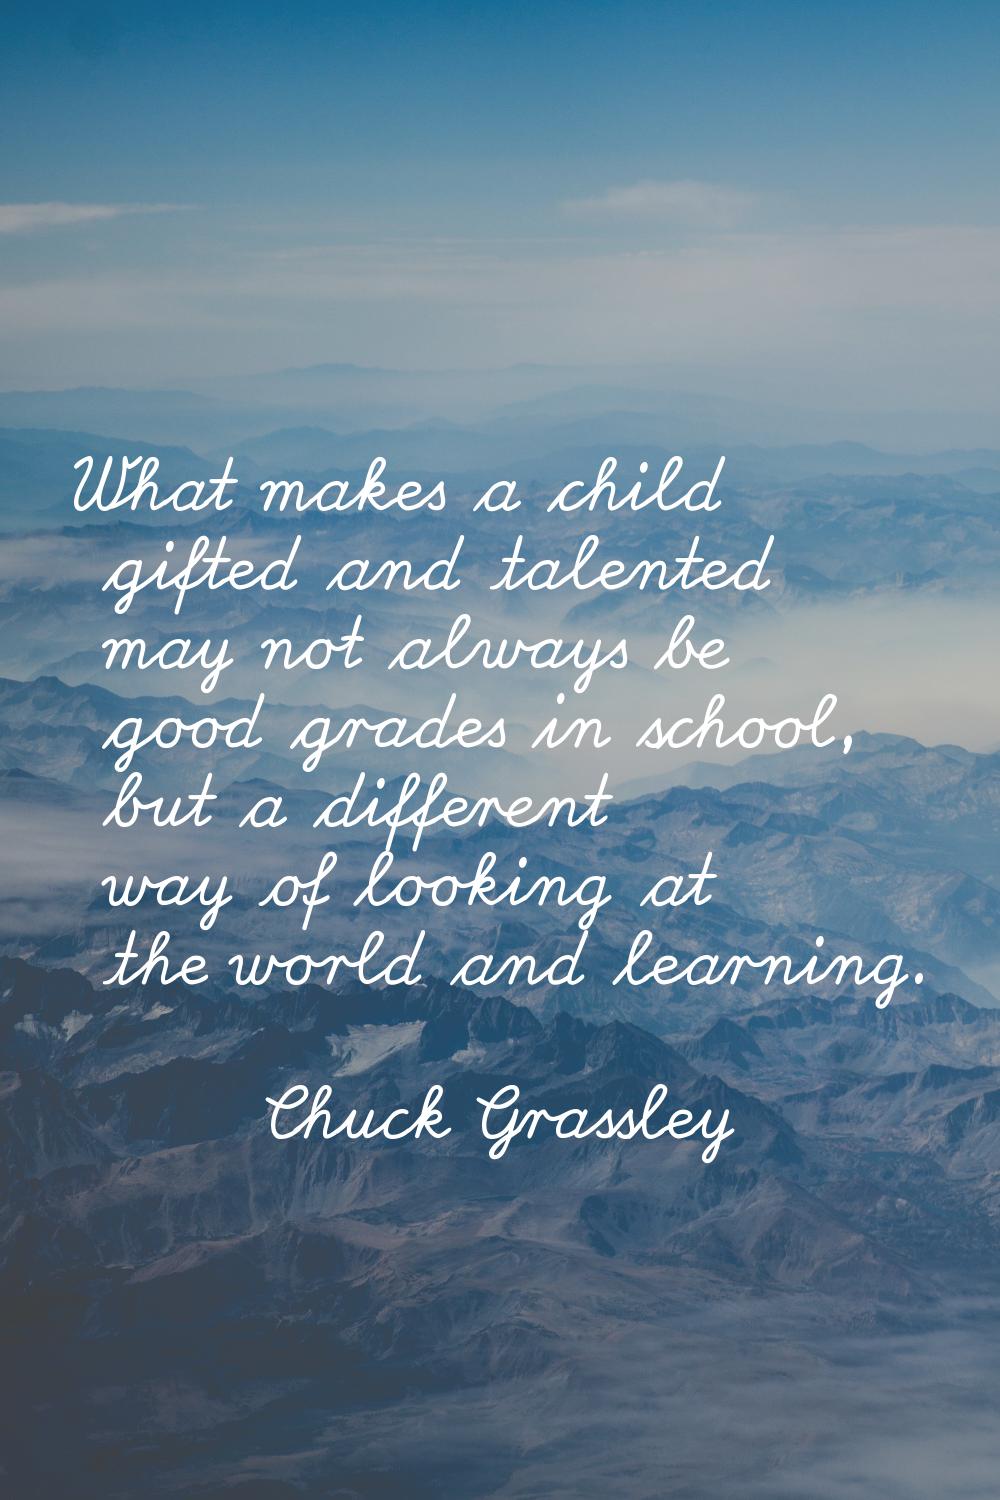 What makes a child gifted and talented may not always be good grades in school, but a different way